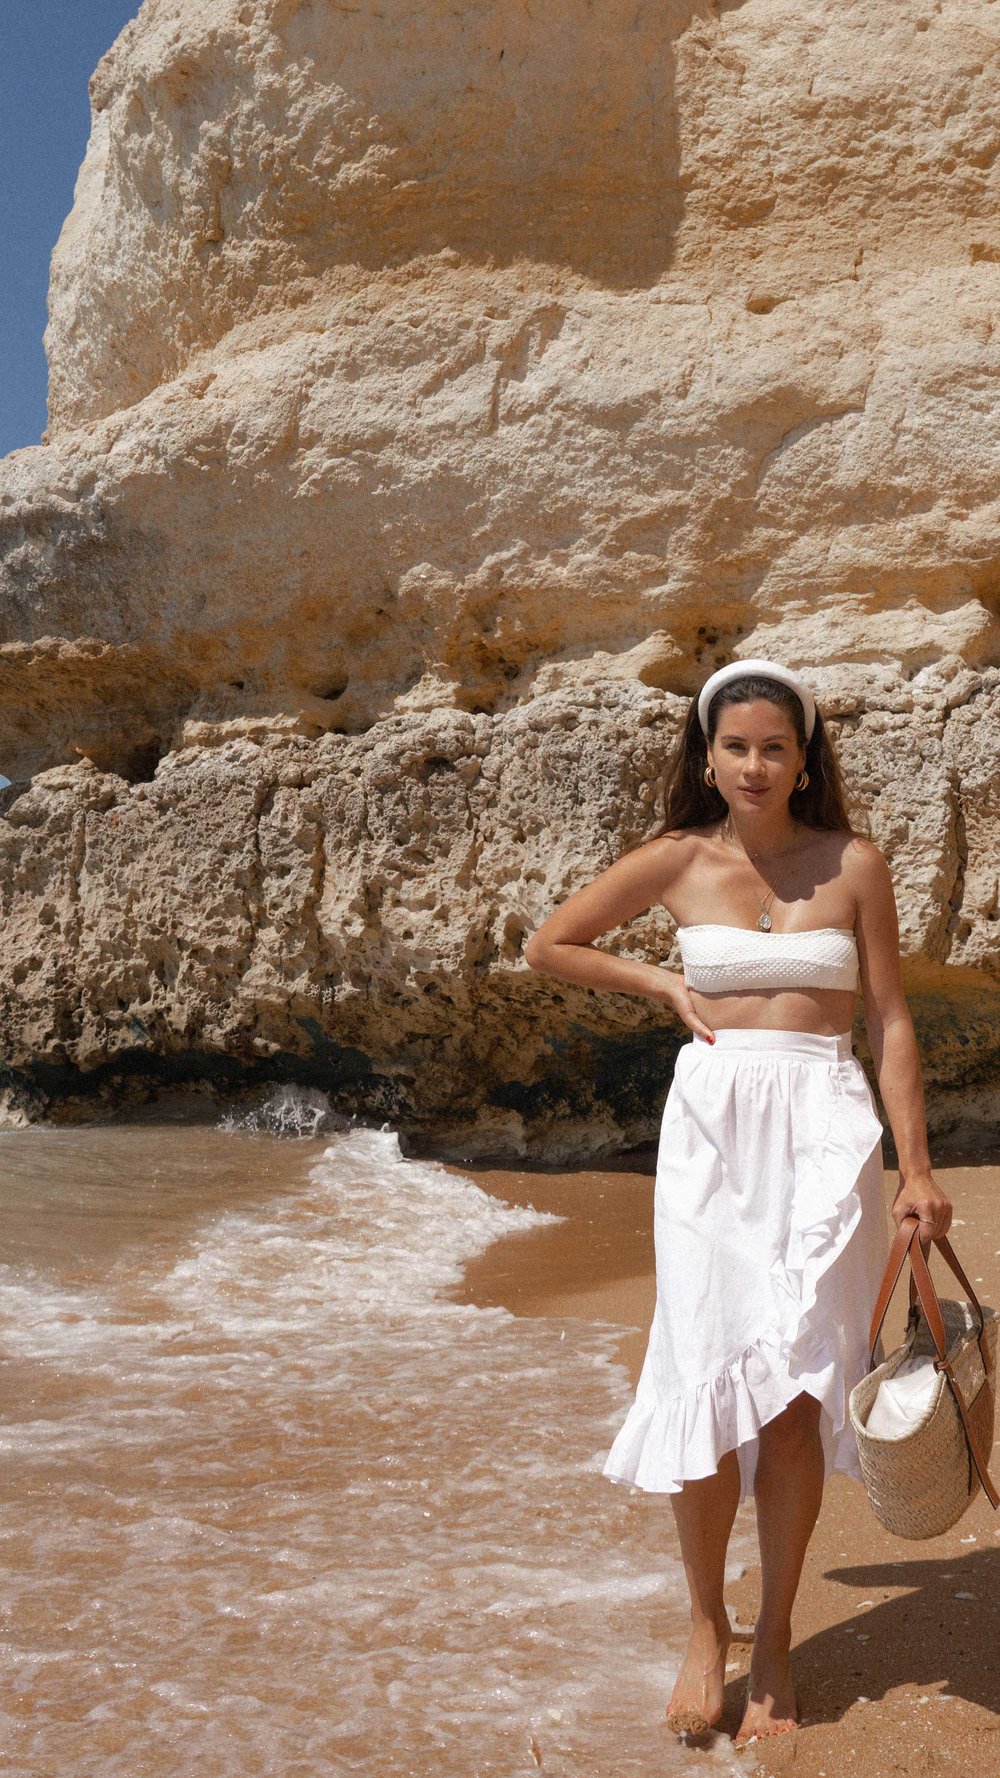 Summer Travel in Algarve, Portugal. Sarah Butler of @SarahChristine wearing cute summer beach outfit in sandy coves of Algarve, Portugal -6.jpg